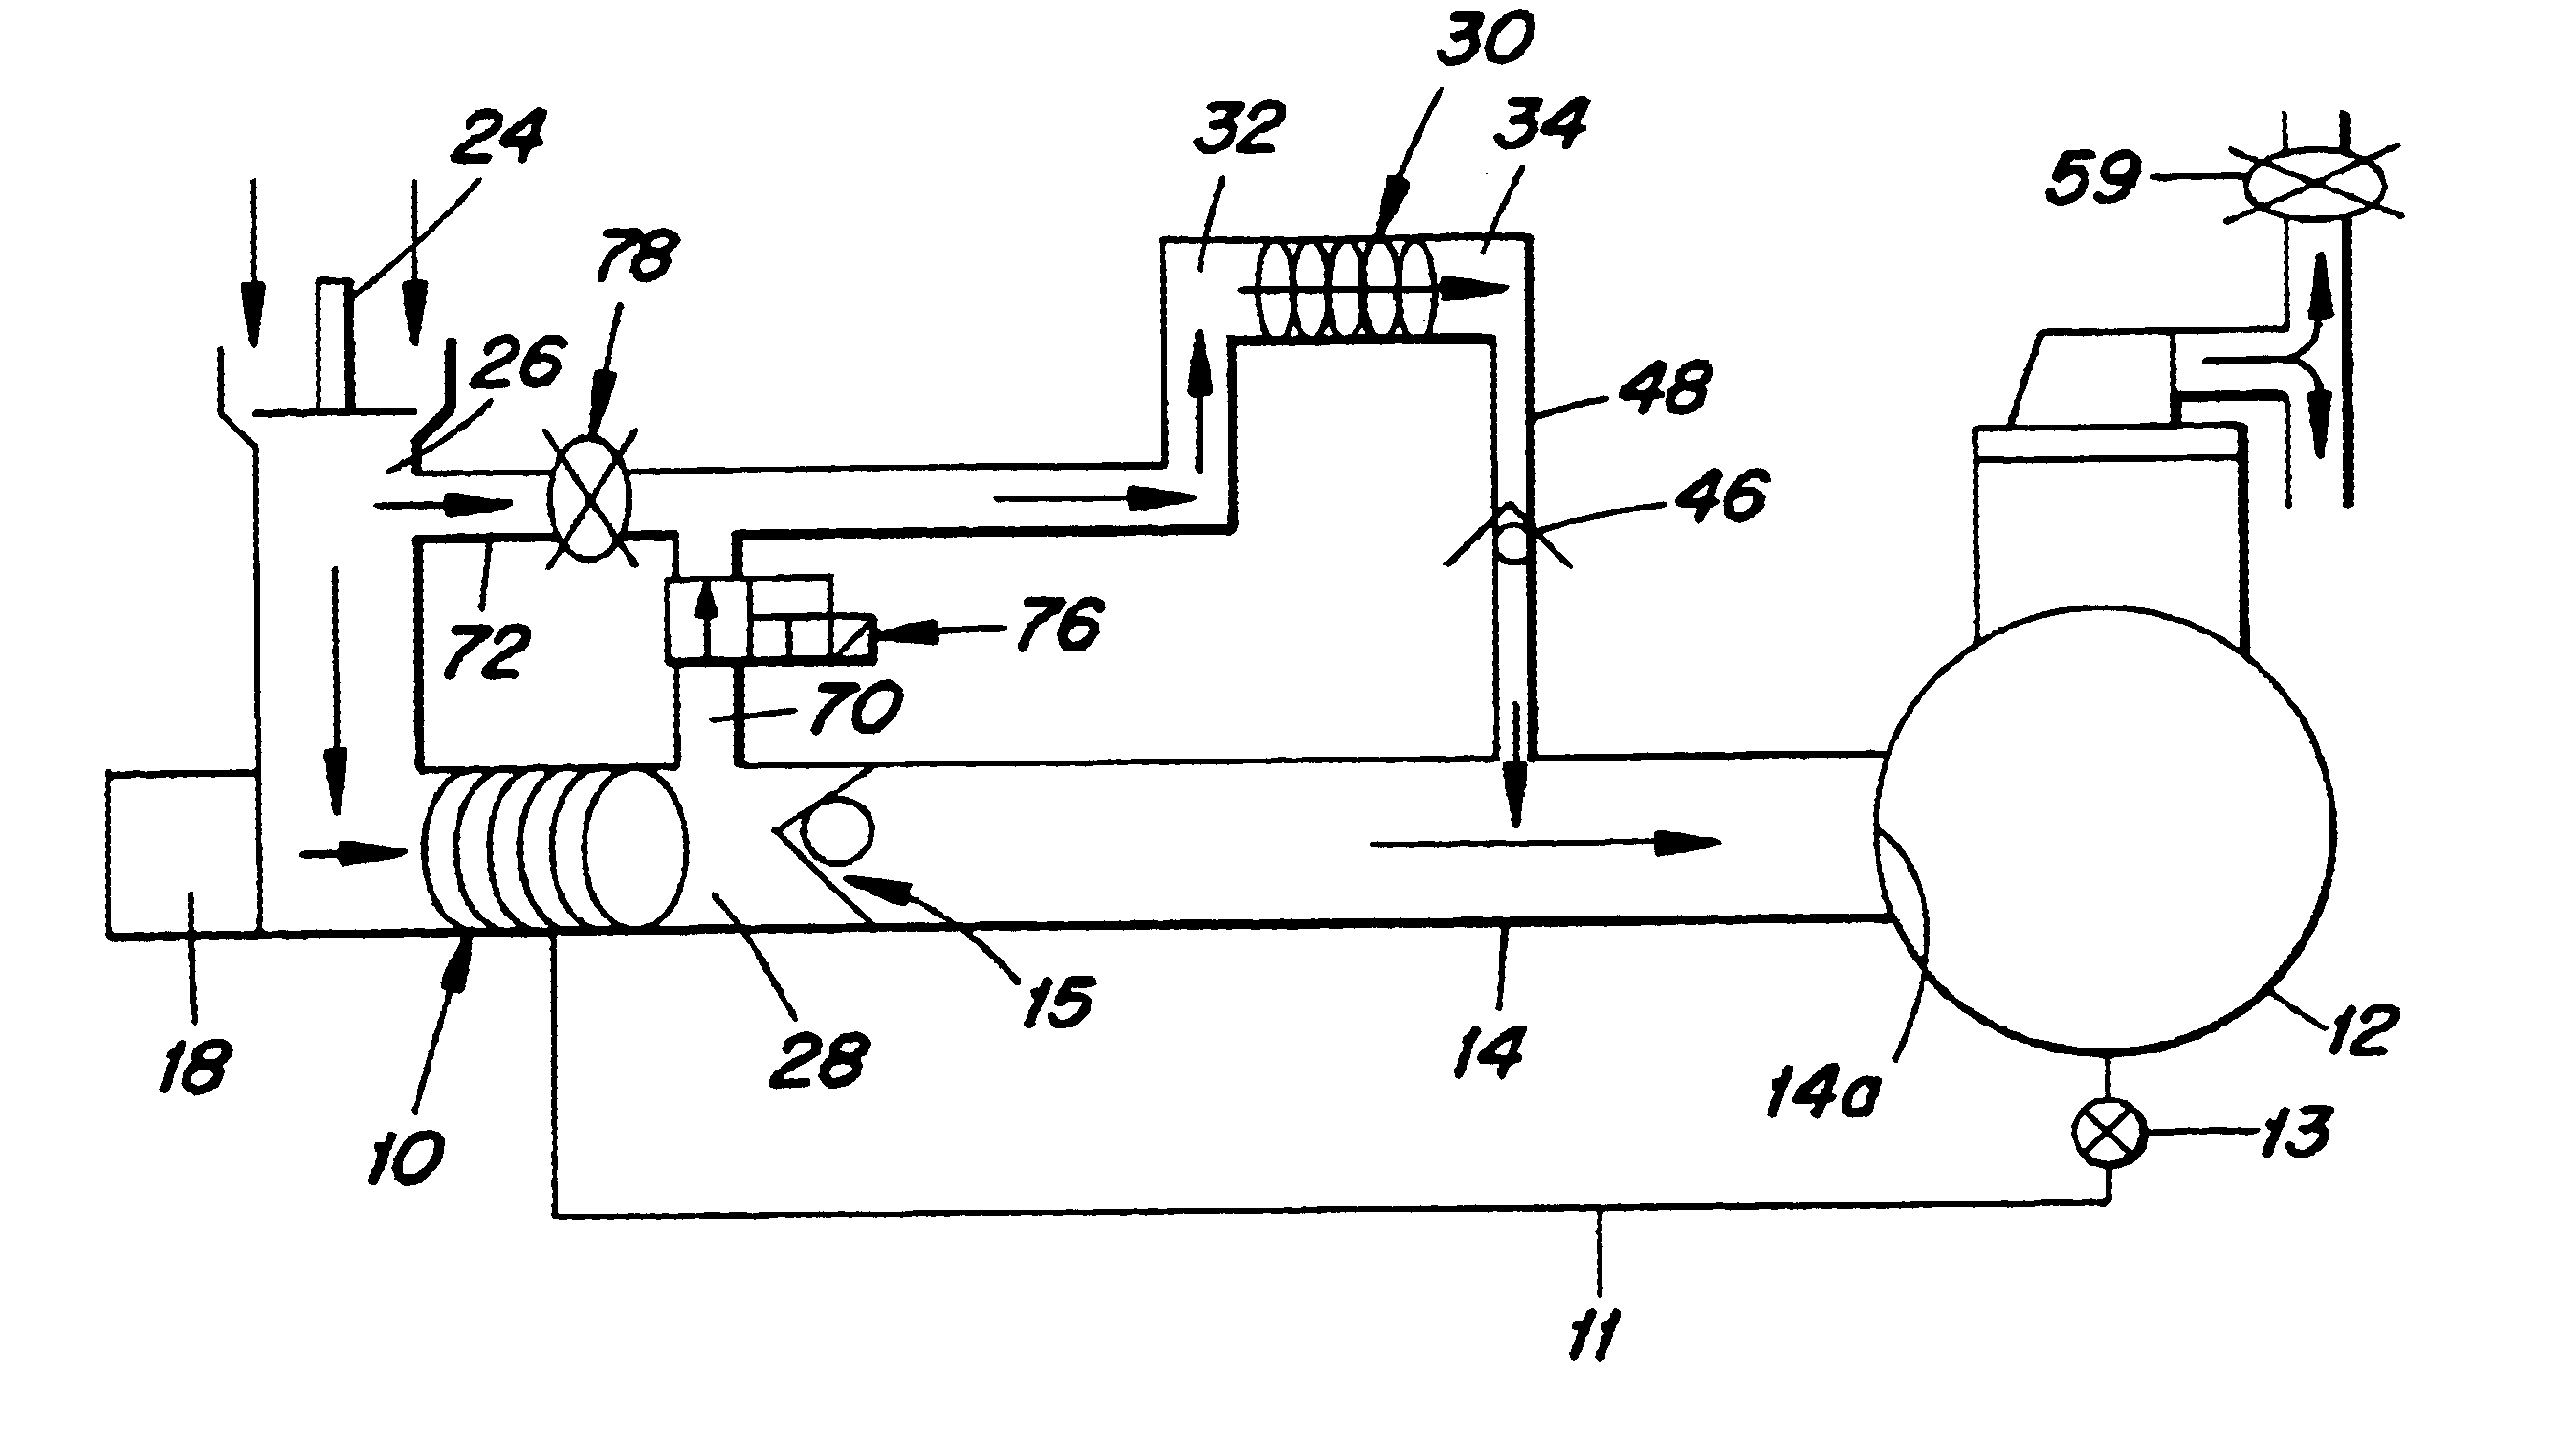 Methods and apparatus for unloading a screw compressor